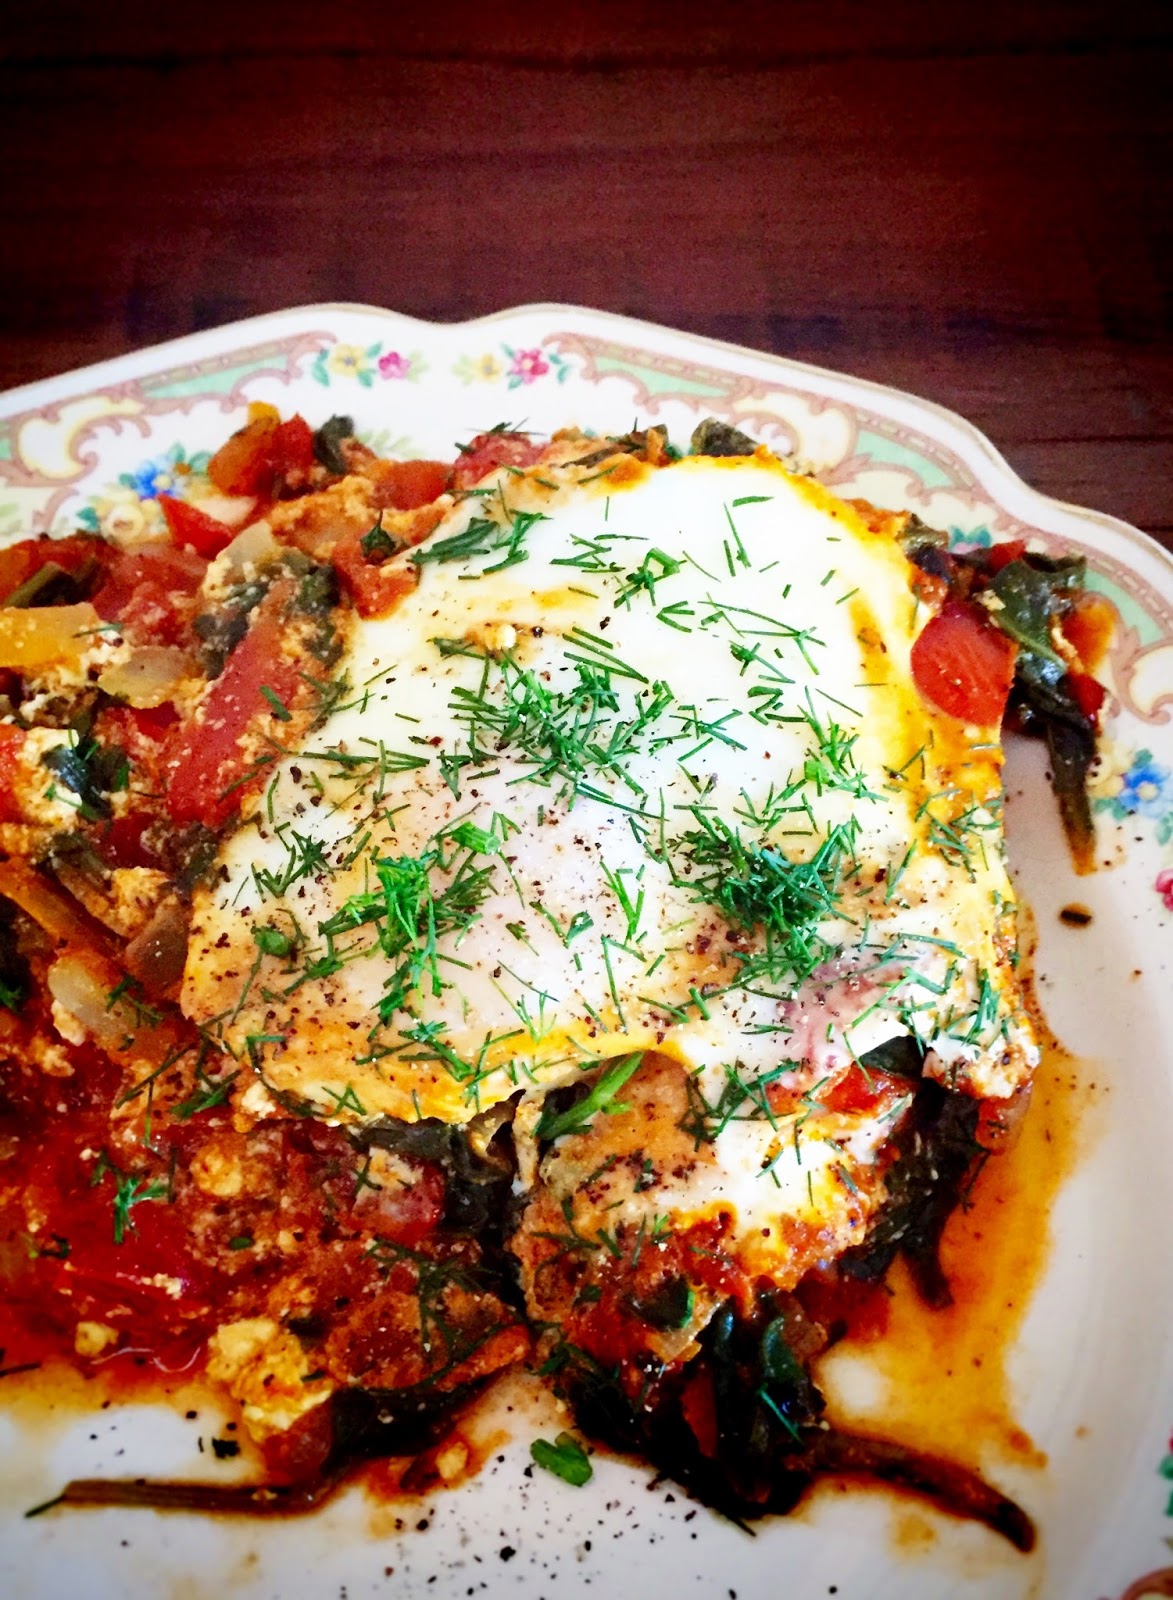 Baked Eggs, North Indian-Style from Seven Spoons